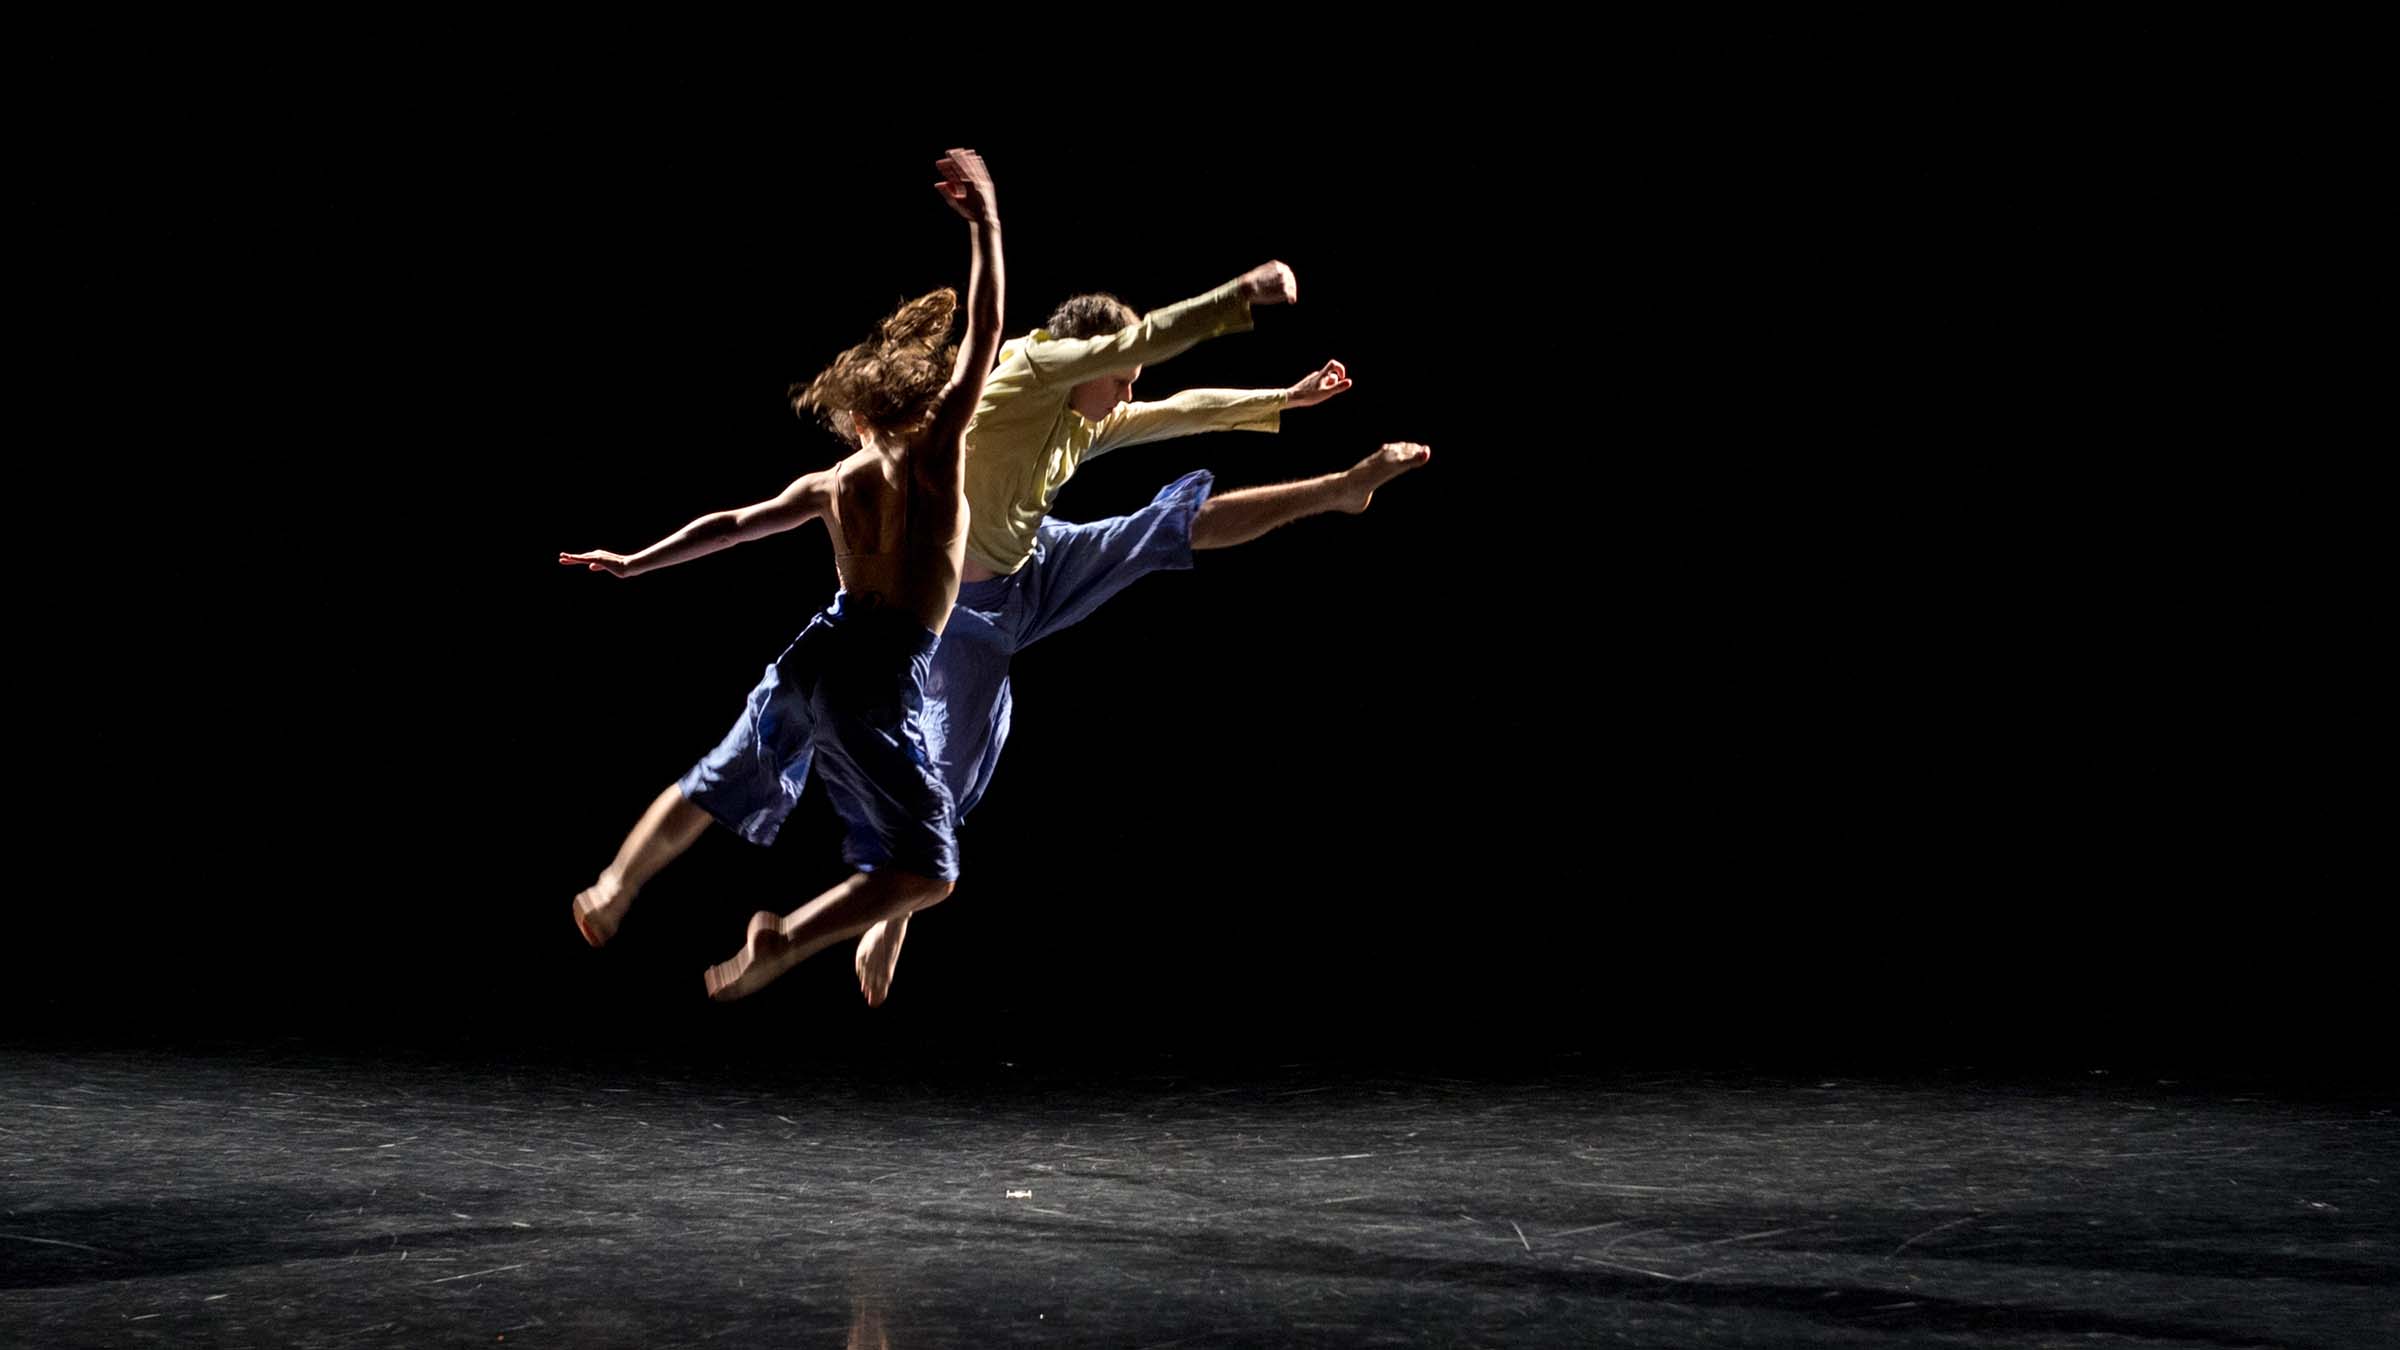 Two dancers caught in mid-leap on a darkened stage. Photo by Mark Sugino.